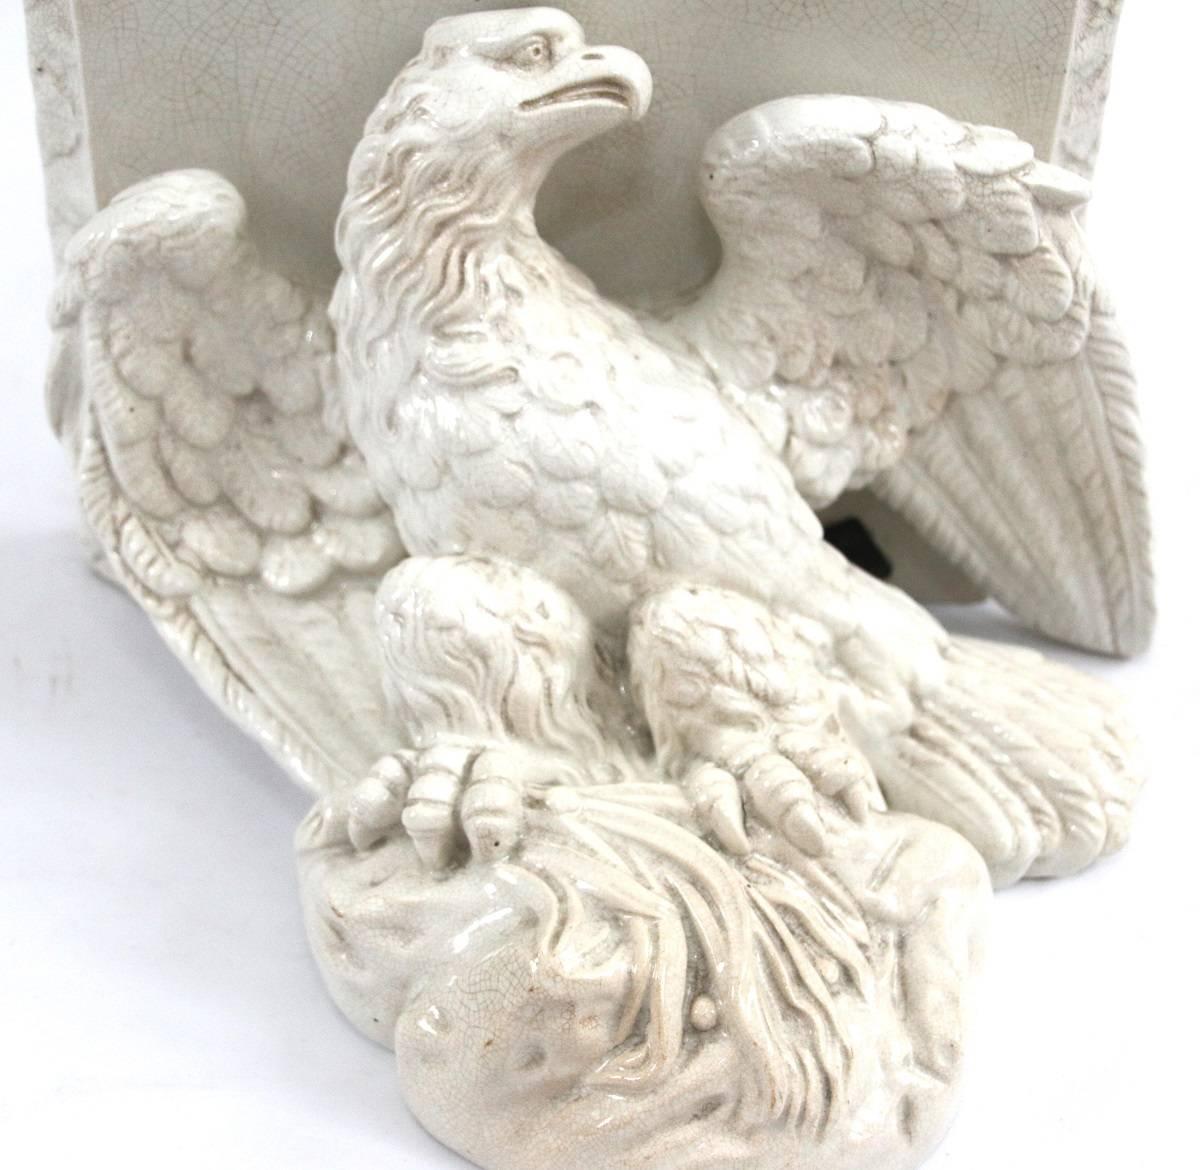 Pair of early 19th century Federal period American eagle form wall bracket shelves in white glaze, retaining the original metal tab hangers, in non-opposing stances, standing atop a rocky outcrop with sheaf of grass grasped in talons, supporting a